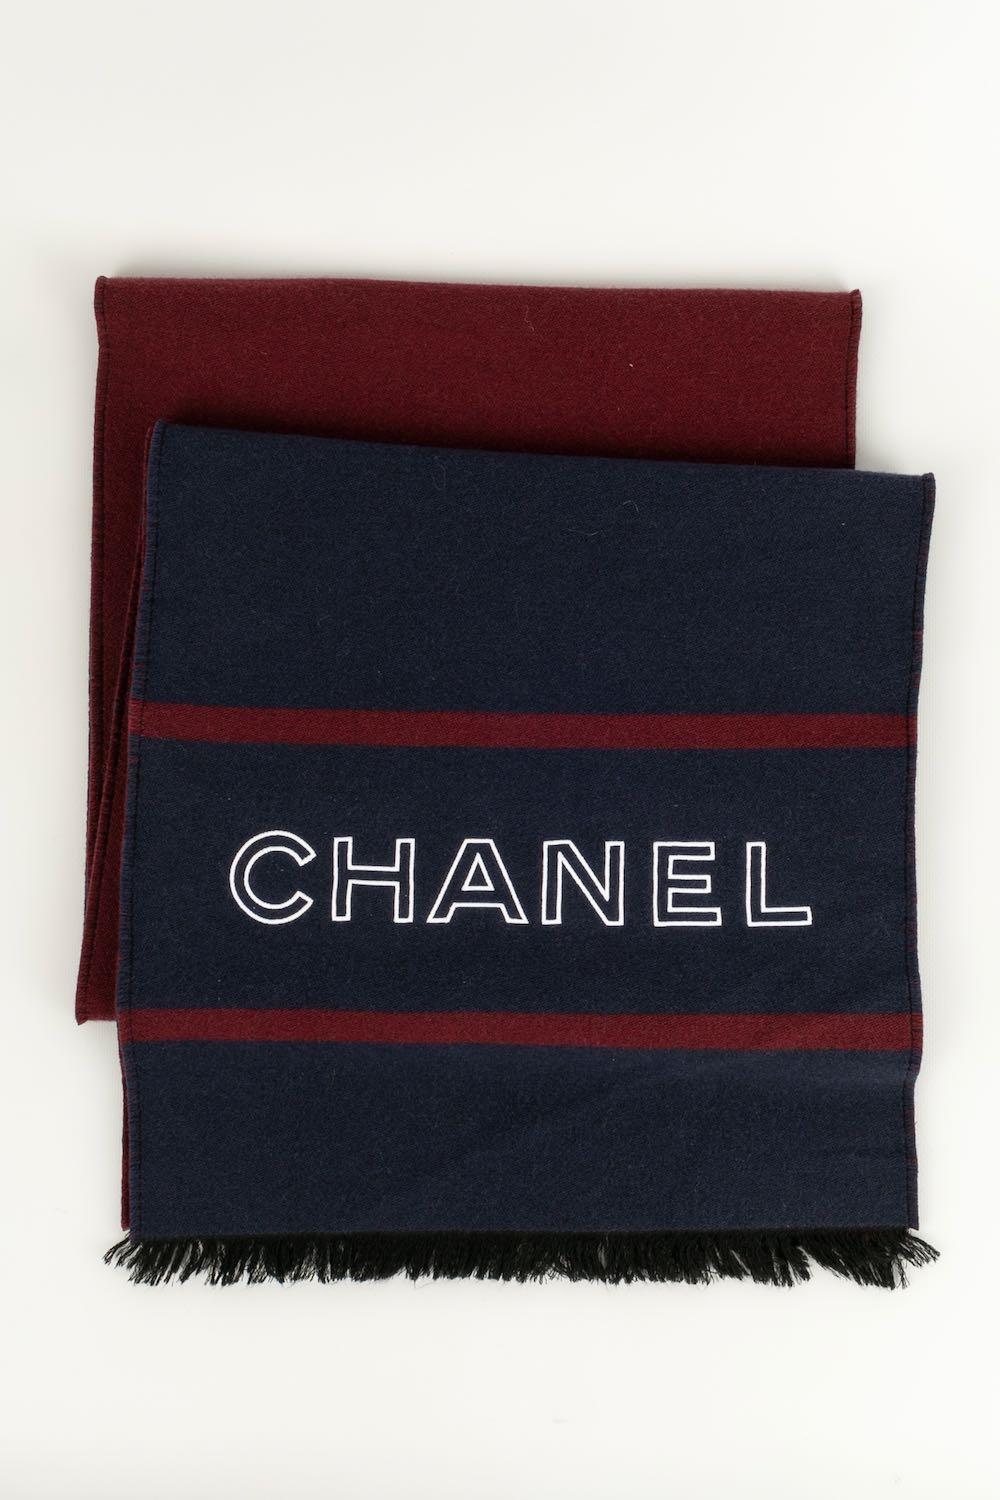 Chanel - Long cashmere scarf in shades of burgundy and blue. Composition label missing.
 
 Additional information:
Dimensions: 36 cm x 210 cm
Condition: Very good condition
Seller Ref number: FFC8